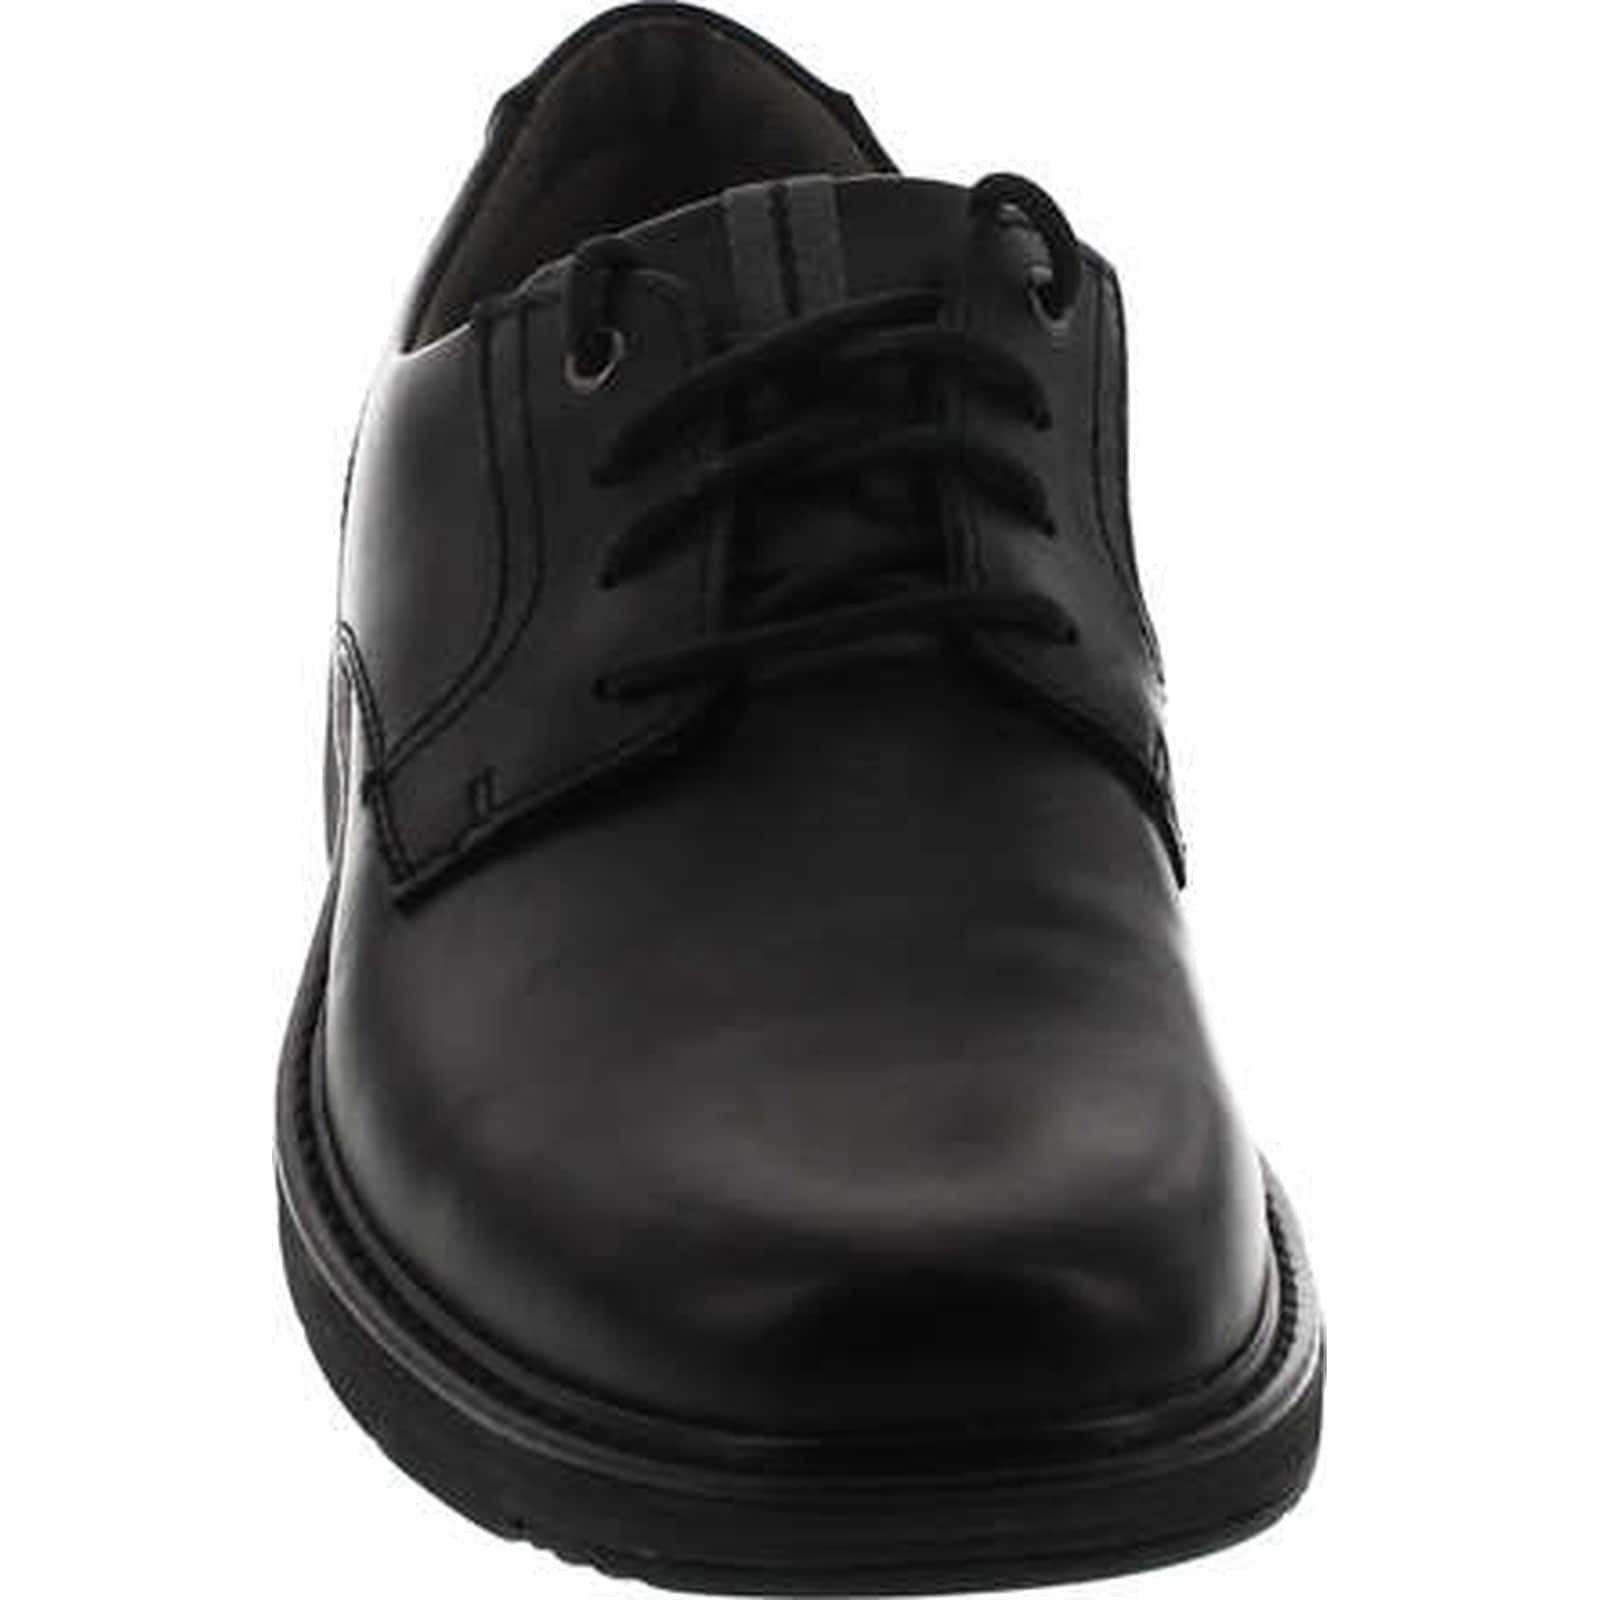 Cushox Pace Oxford - Black Leather 